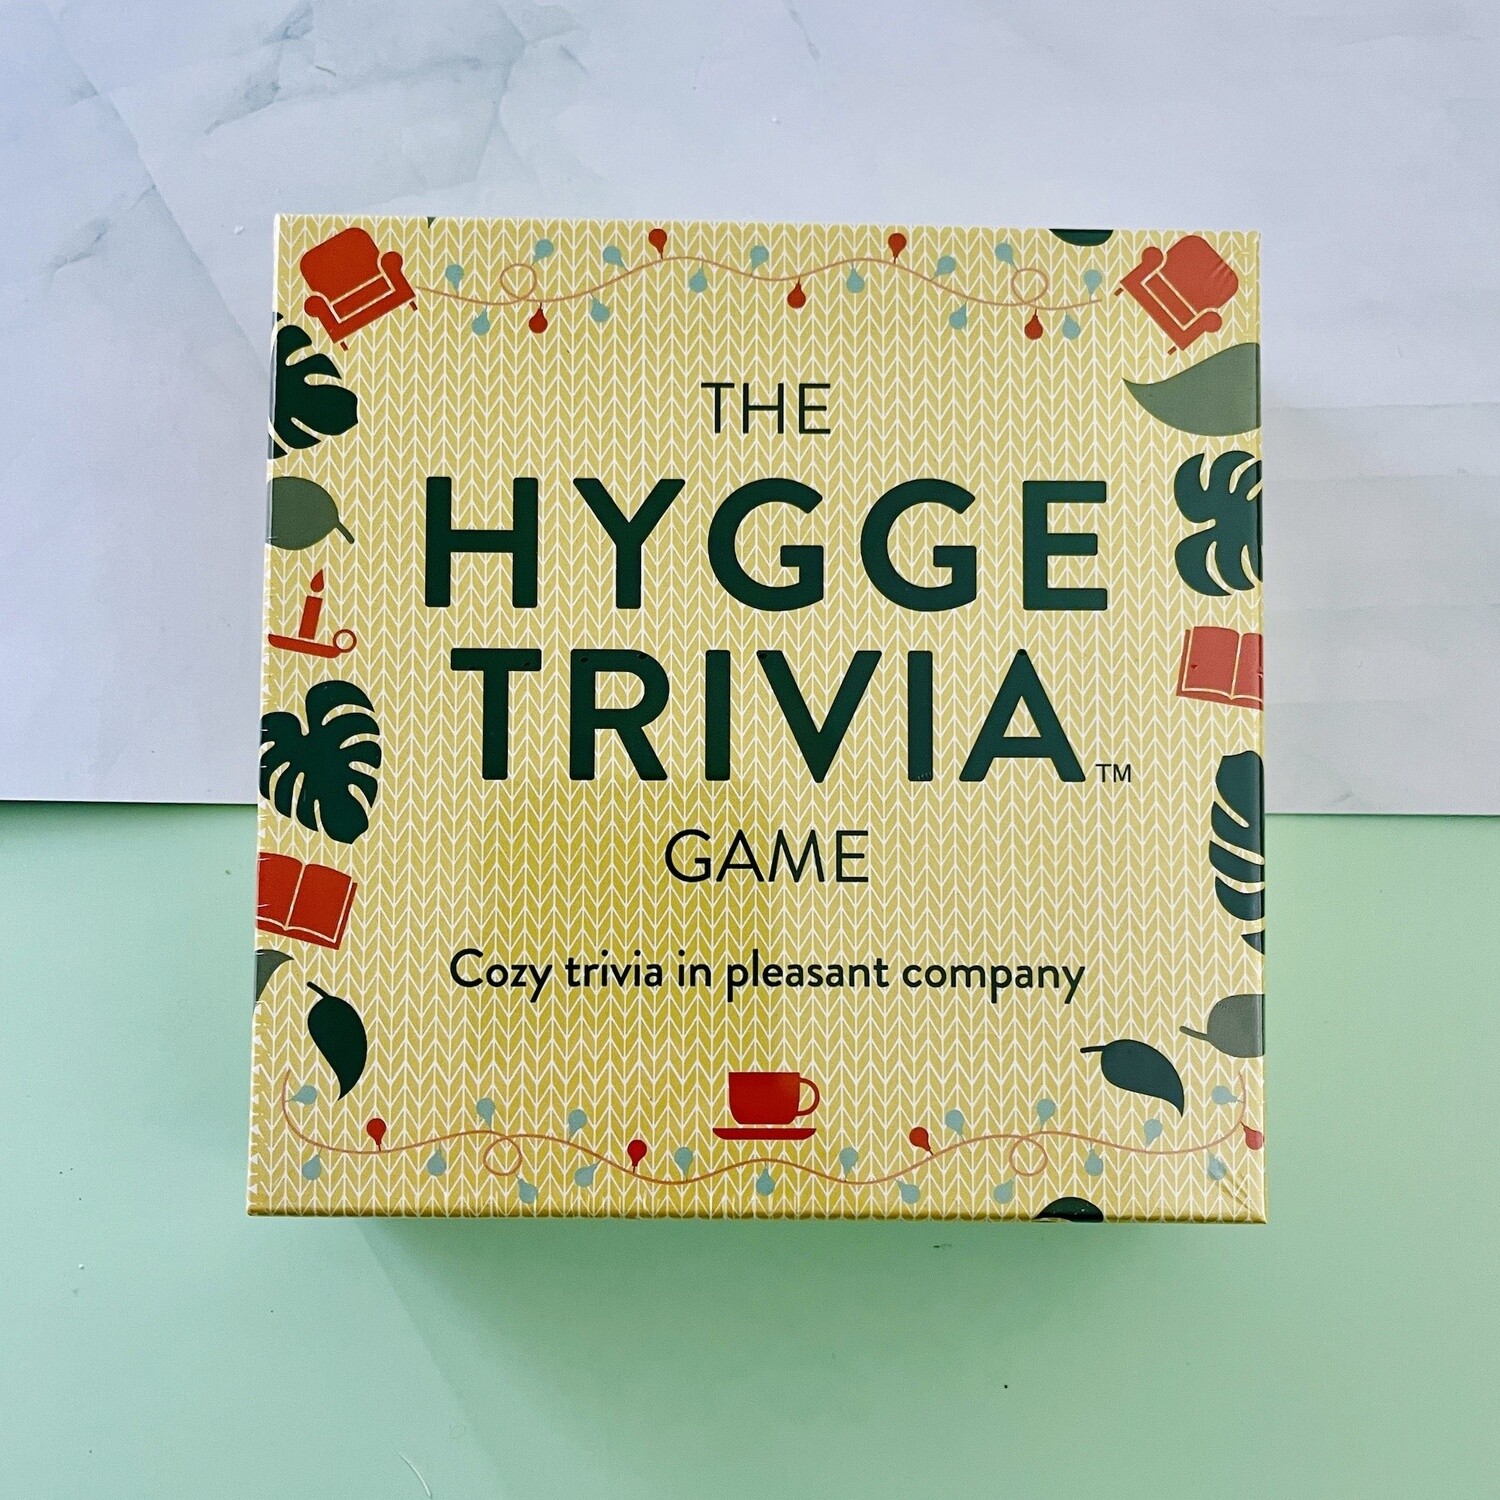 The Hygge Game: Trivia Edition